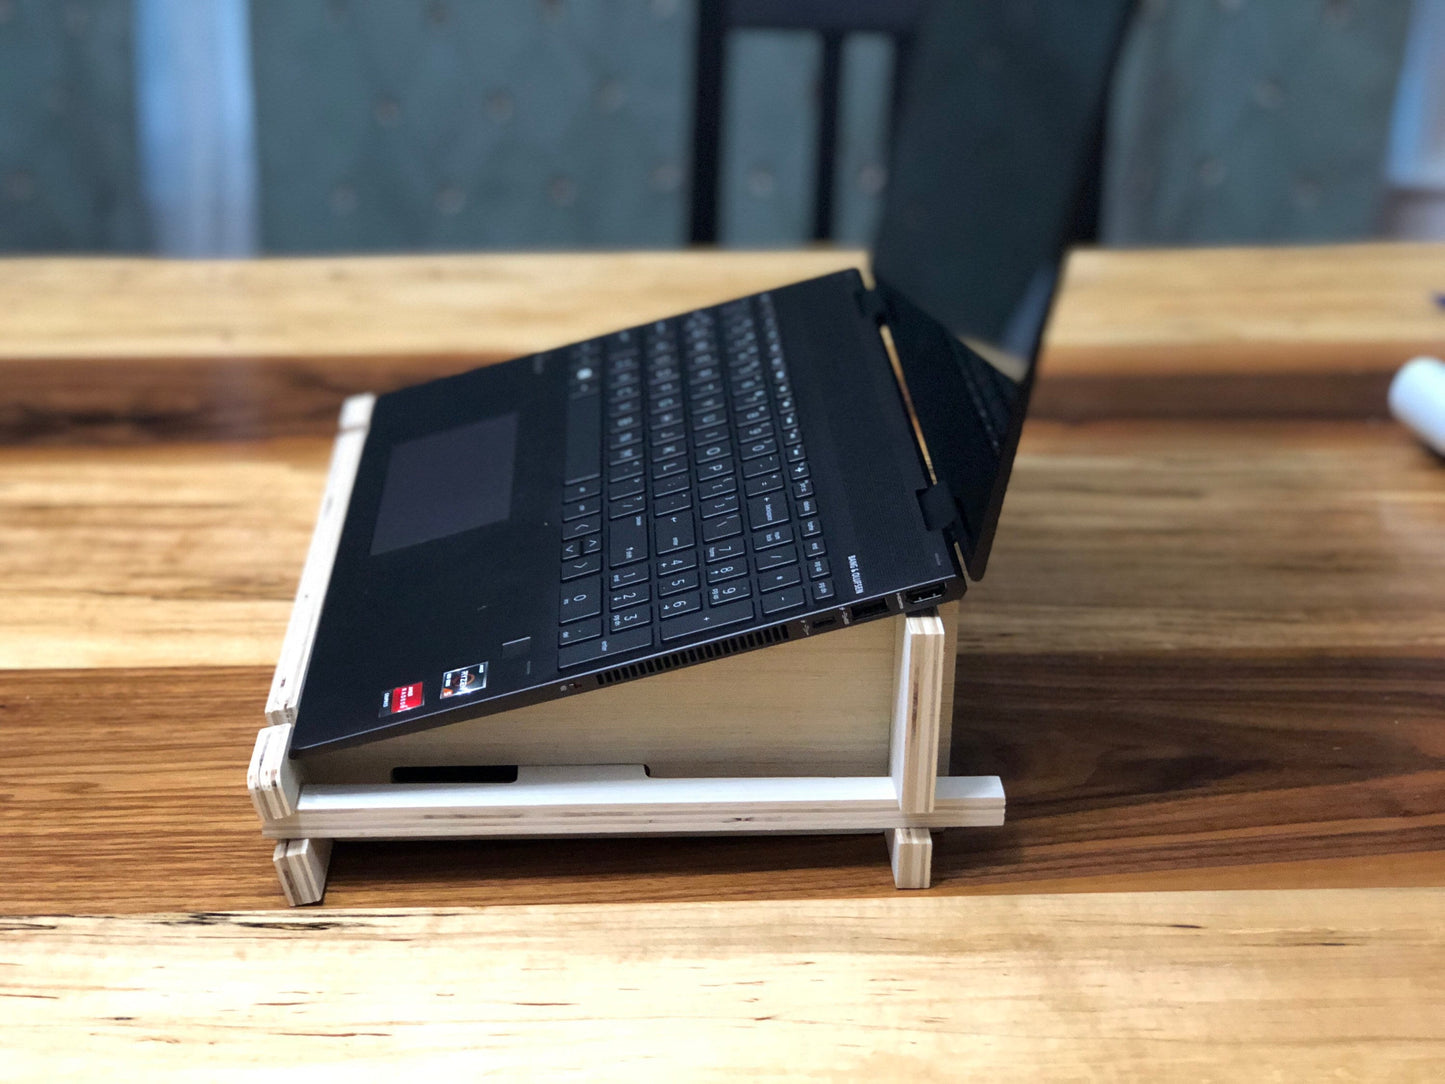 Flatpack laptop stand